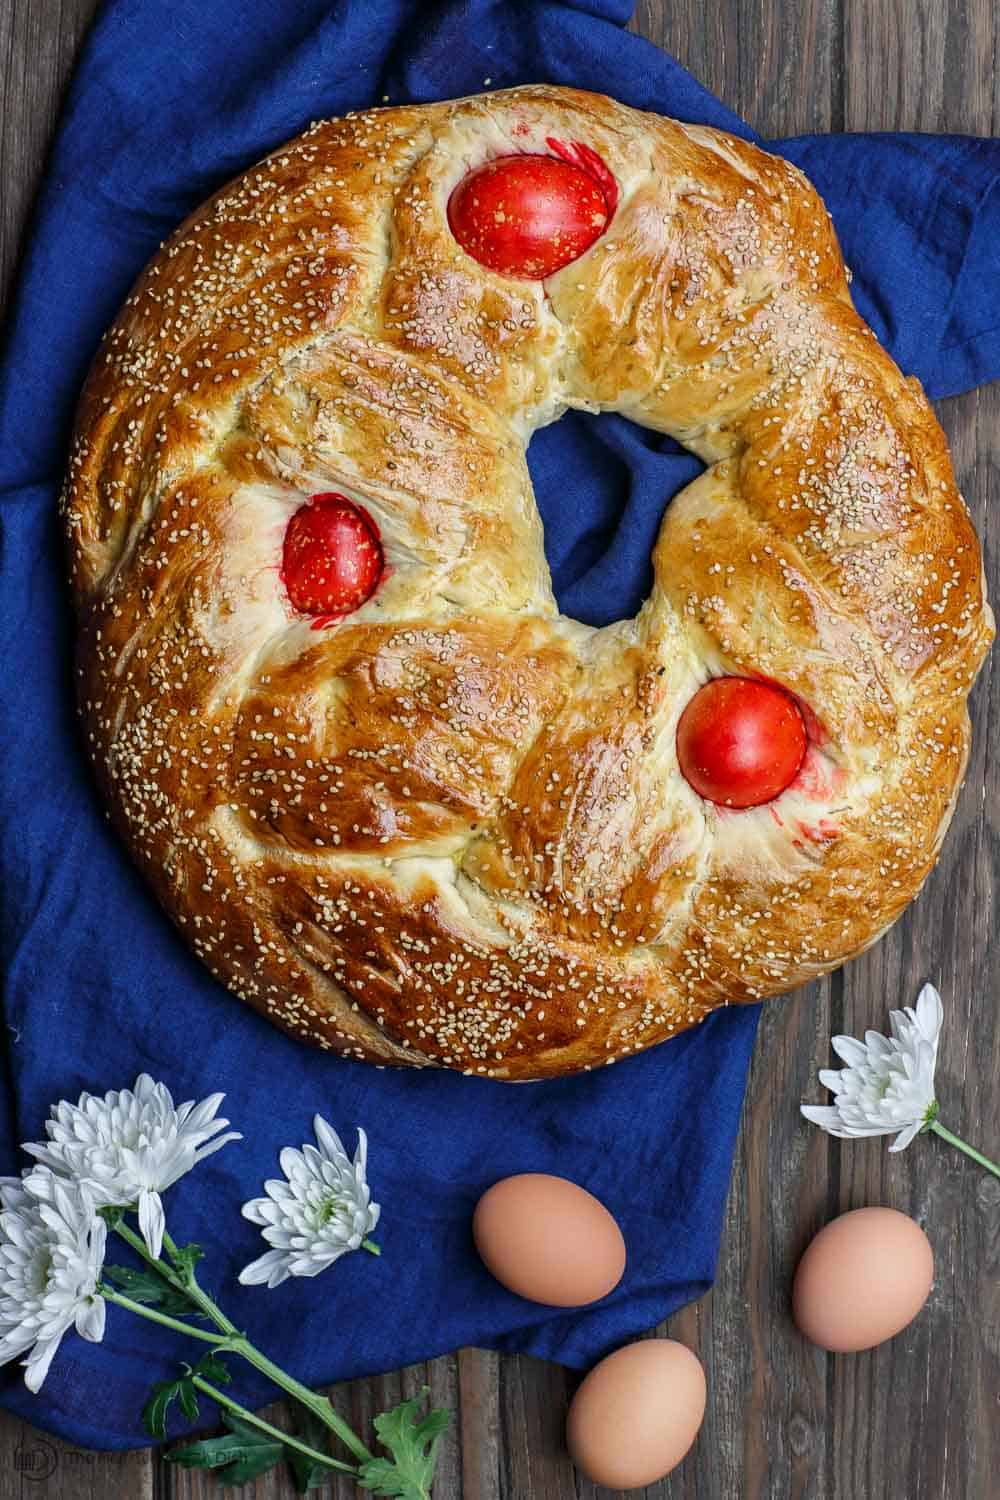 Crispy crust of Greek Easter Bread dusted with sesame seeds